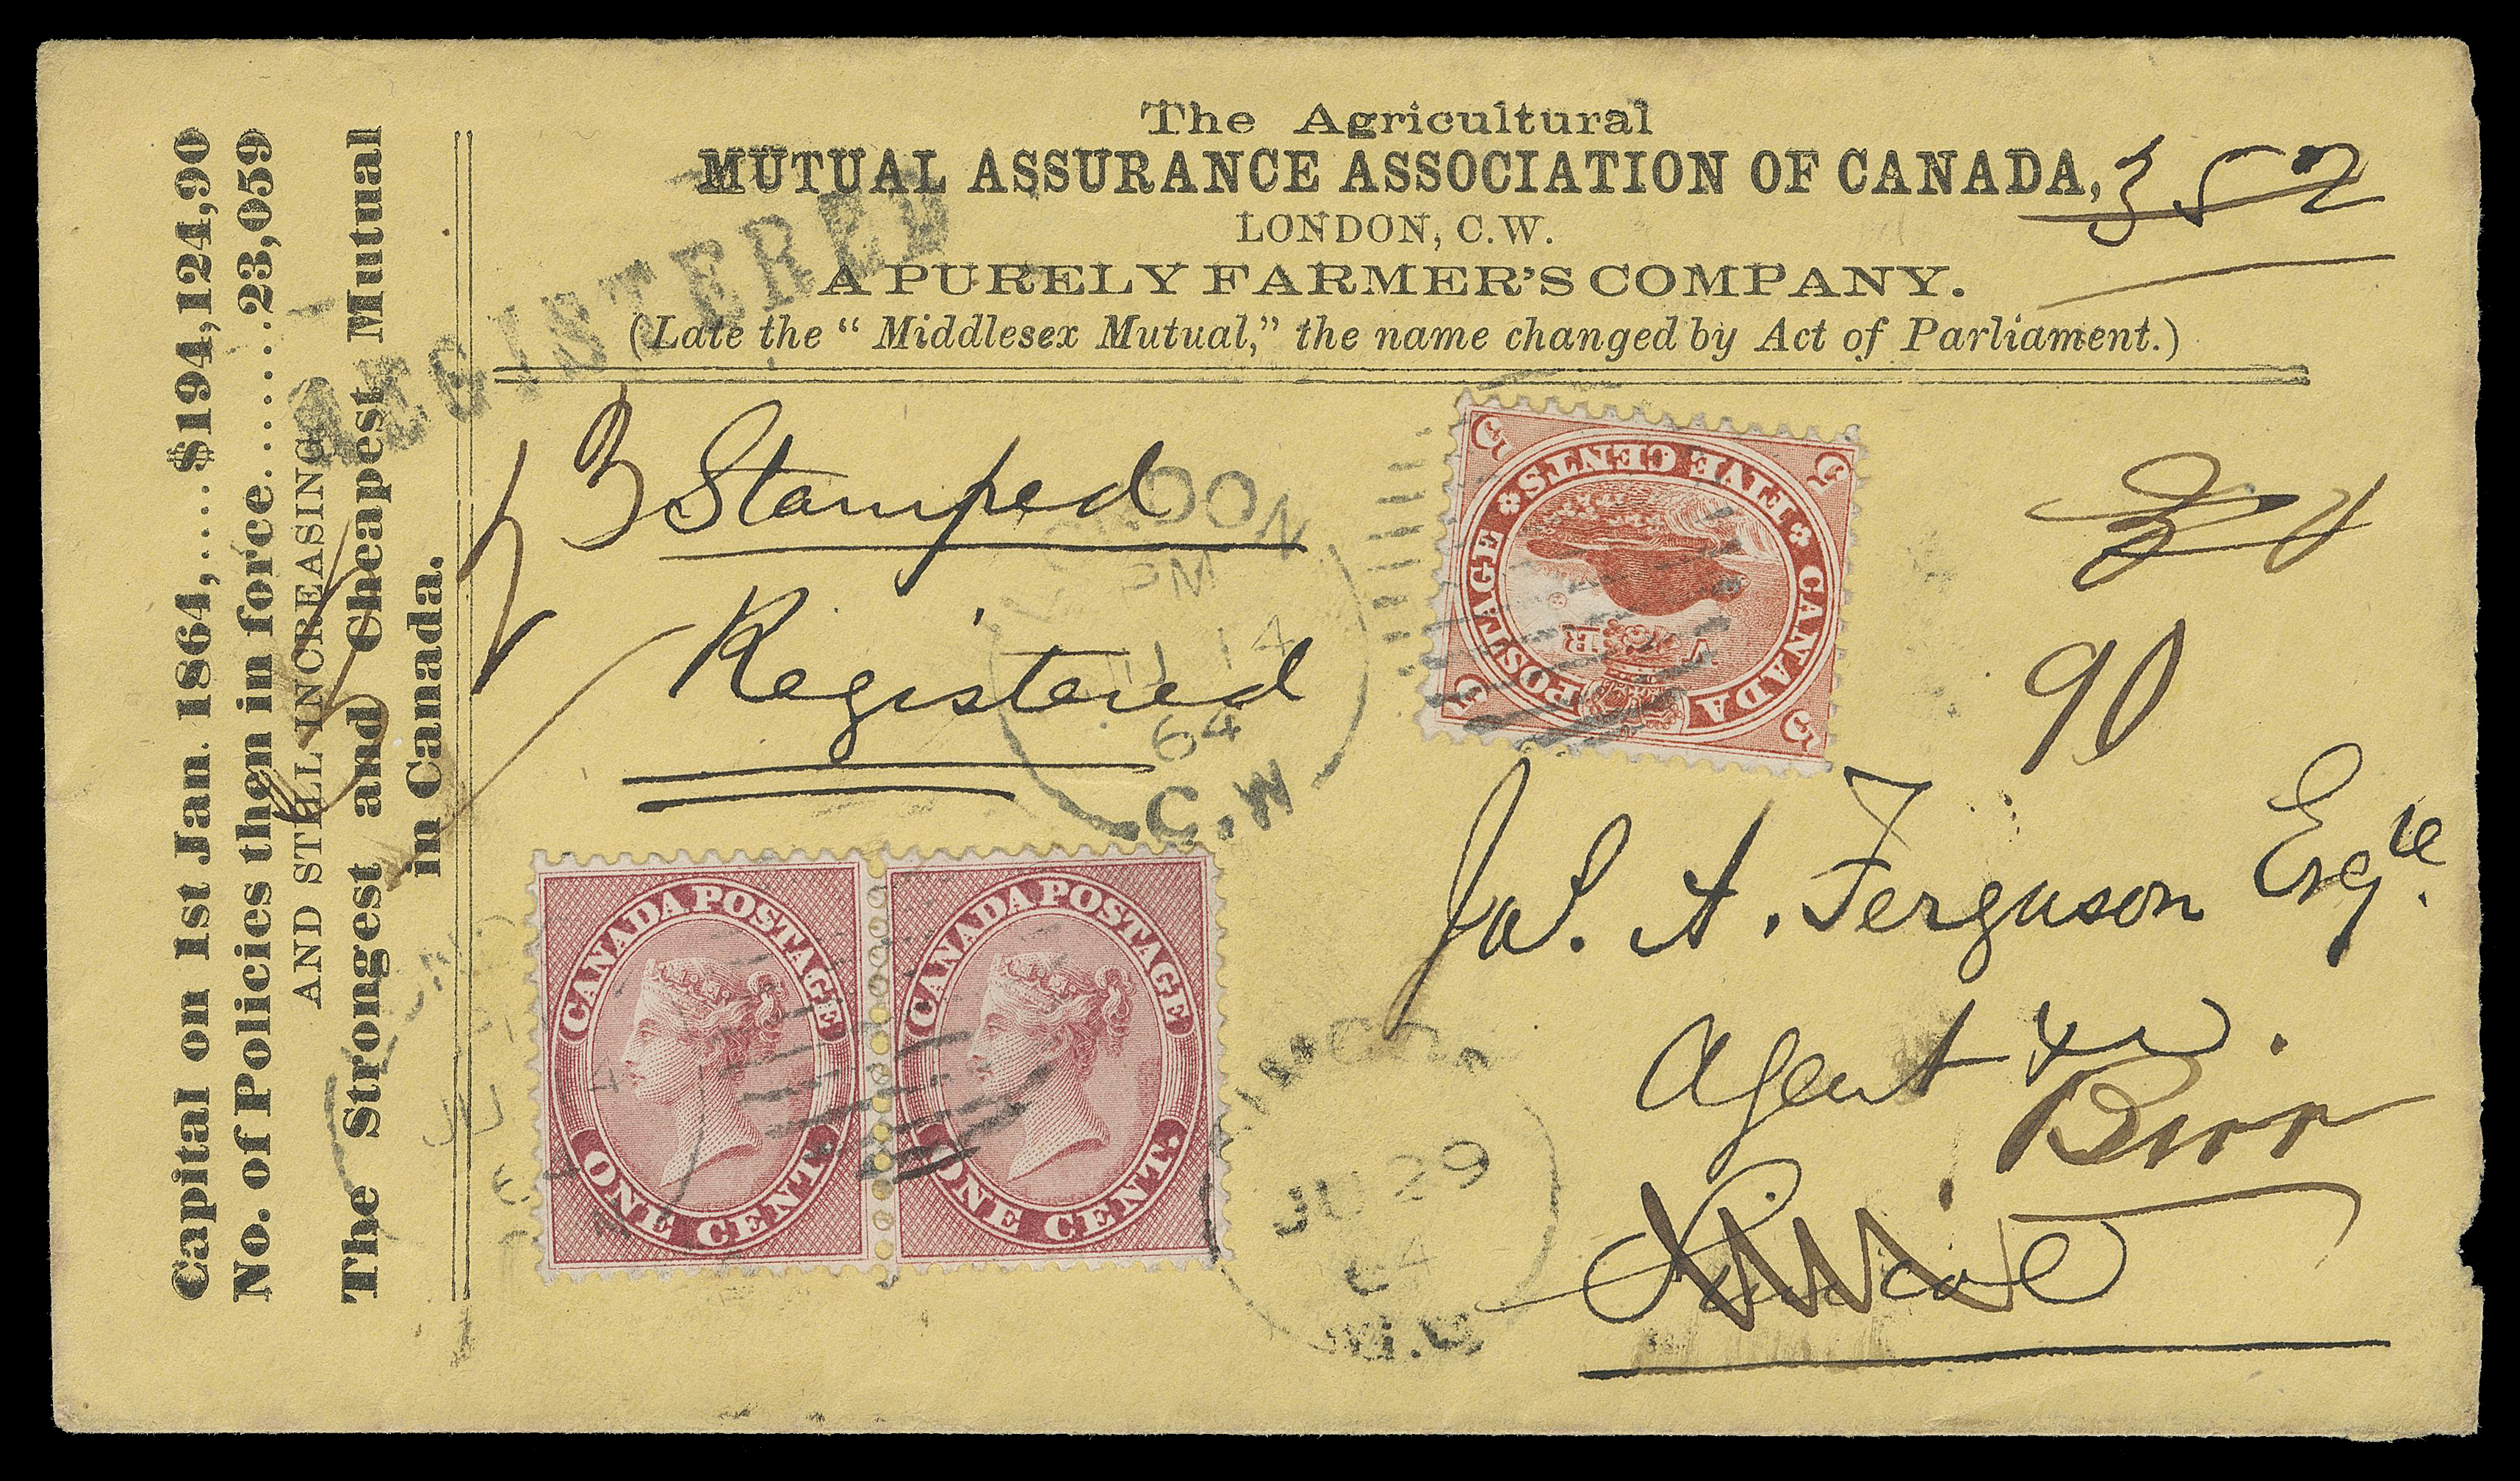 HALF PENNY AND ONE CENT  1864 (June 14) Agricultural Mutual Assurance Association of Canada yellow envelope mailed registered from London, C.W. to Simcoe, franked with 5c vermilion and well centered pair of 1c rose, perf 12x11¾, brilliant fresh colours, cover with inconsequential nick at lower right; redirected to Birr with five different transit and arrival markings on back along with straightline REGISTERED handstamp; pays 5 cent letter rate with 2 cent registration fee. An impressive and visually striking cover in choice condition, VF (Unitrade 14viii, 15)